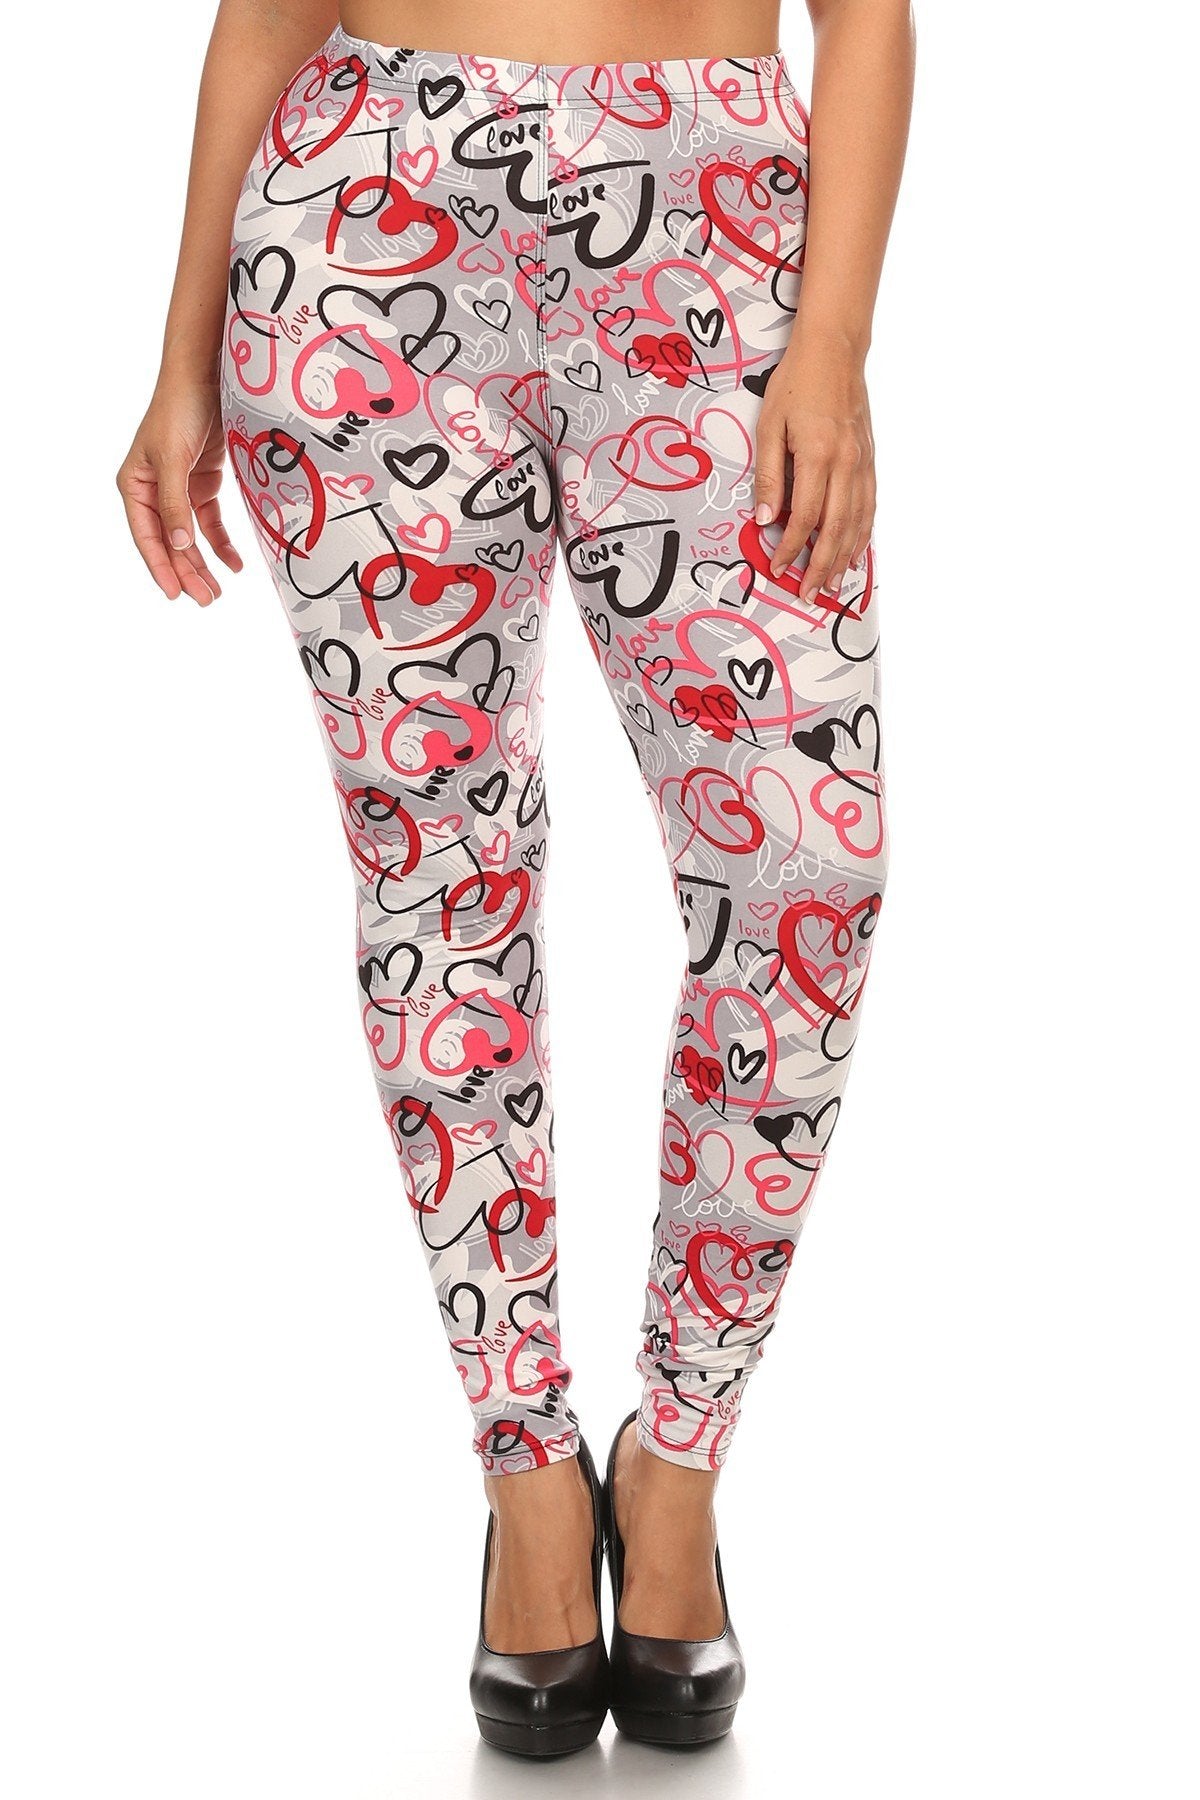 Plus Heart Print, Full Length Leggings In A Slim Fitting Style With A Banded High Waist